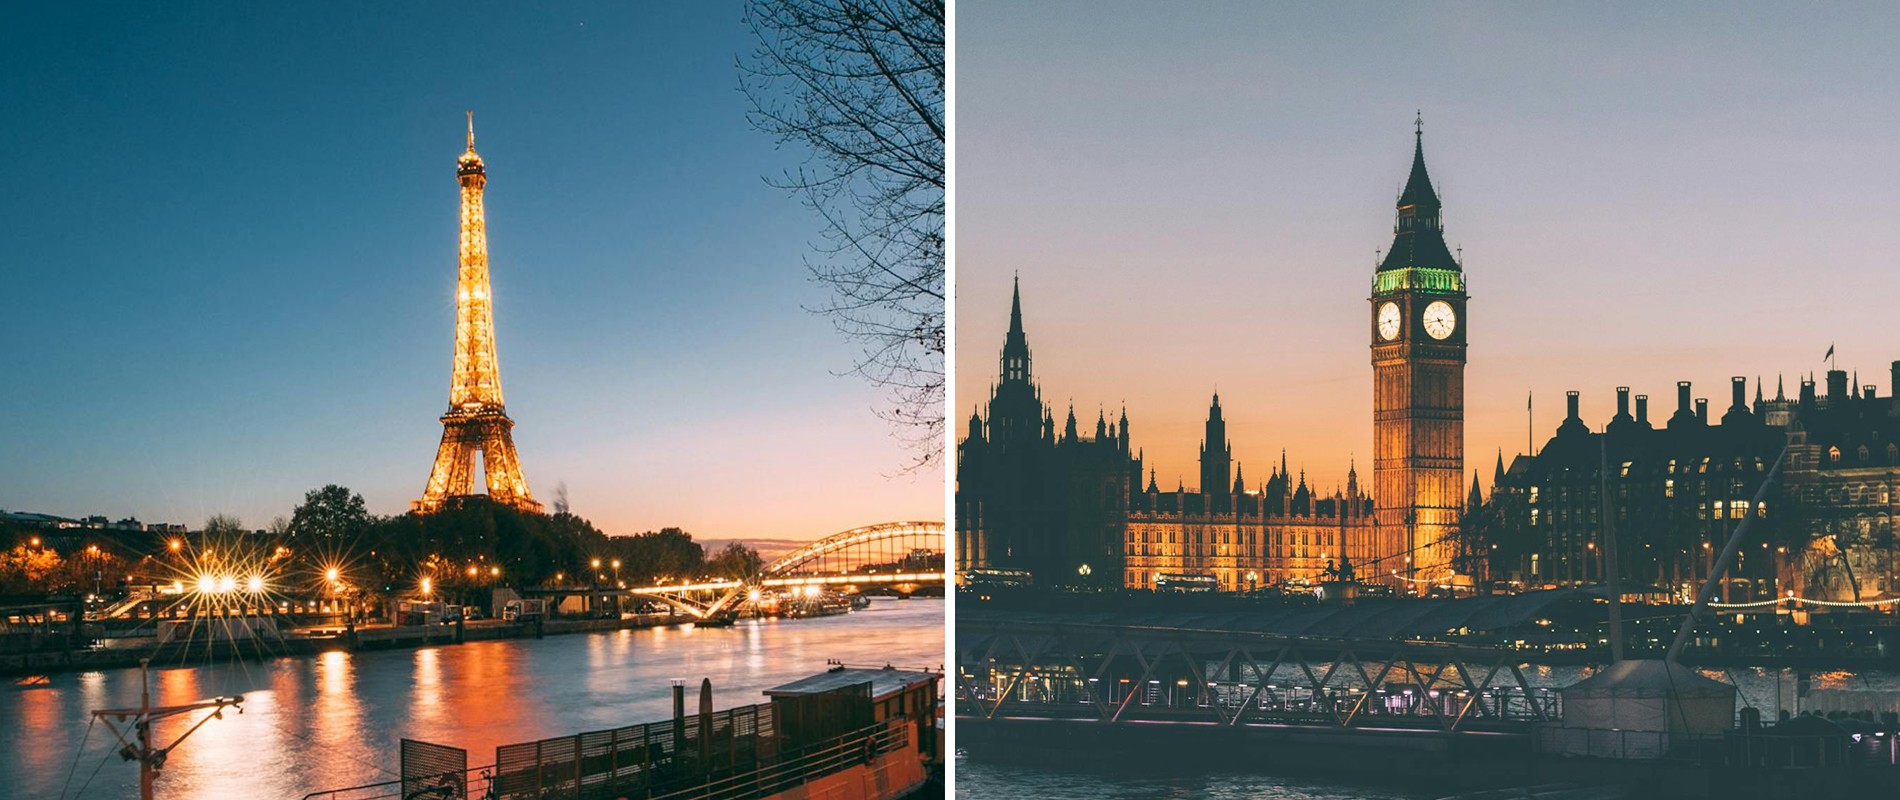 living in france vs the uk landmarks in the cities of paris and london contrasting